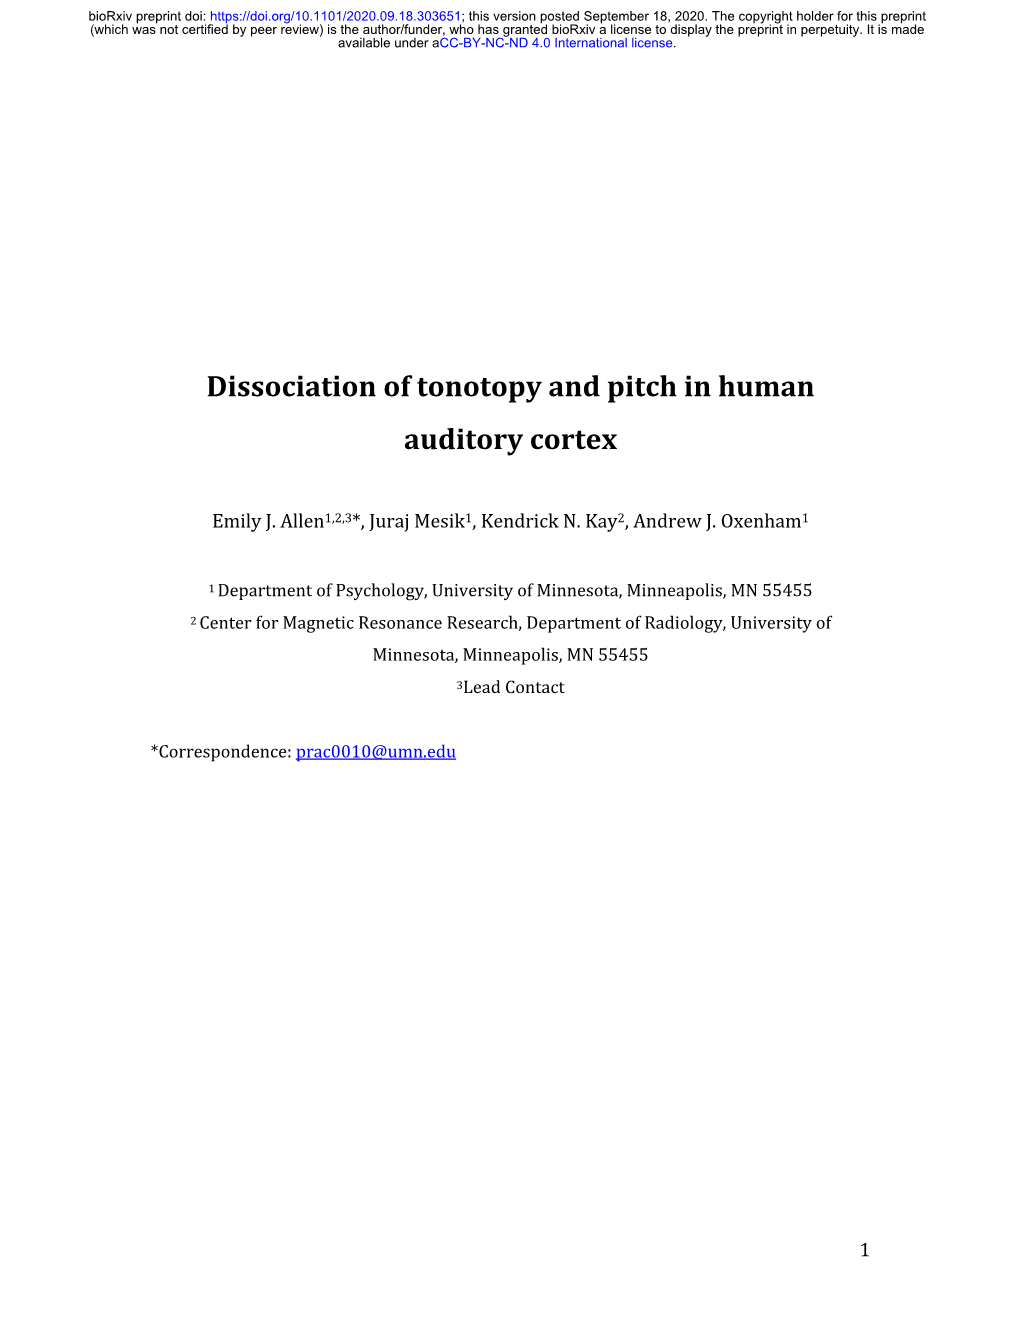 Dissociation of Tonotopy and Pitch in Human Auditory Cortex